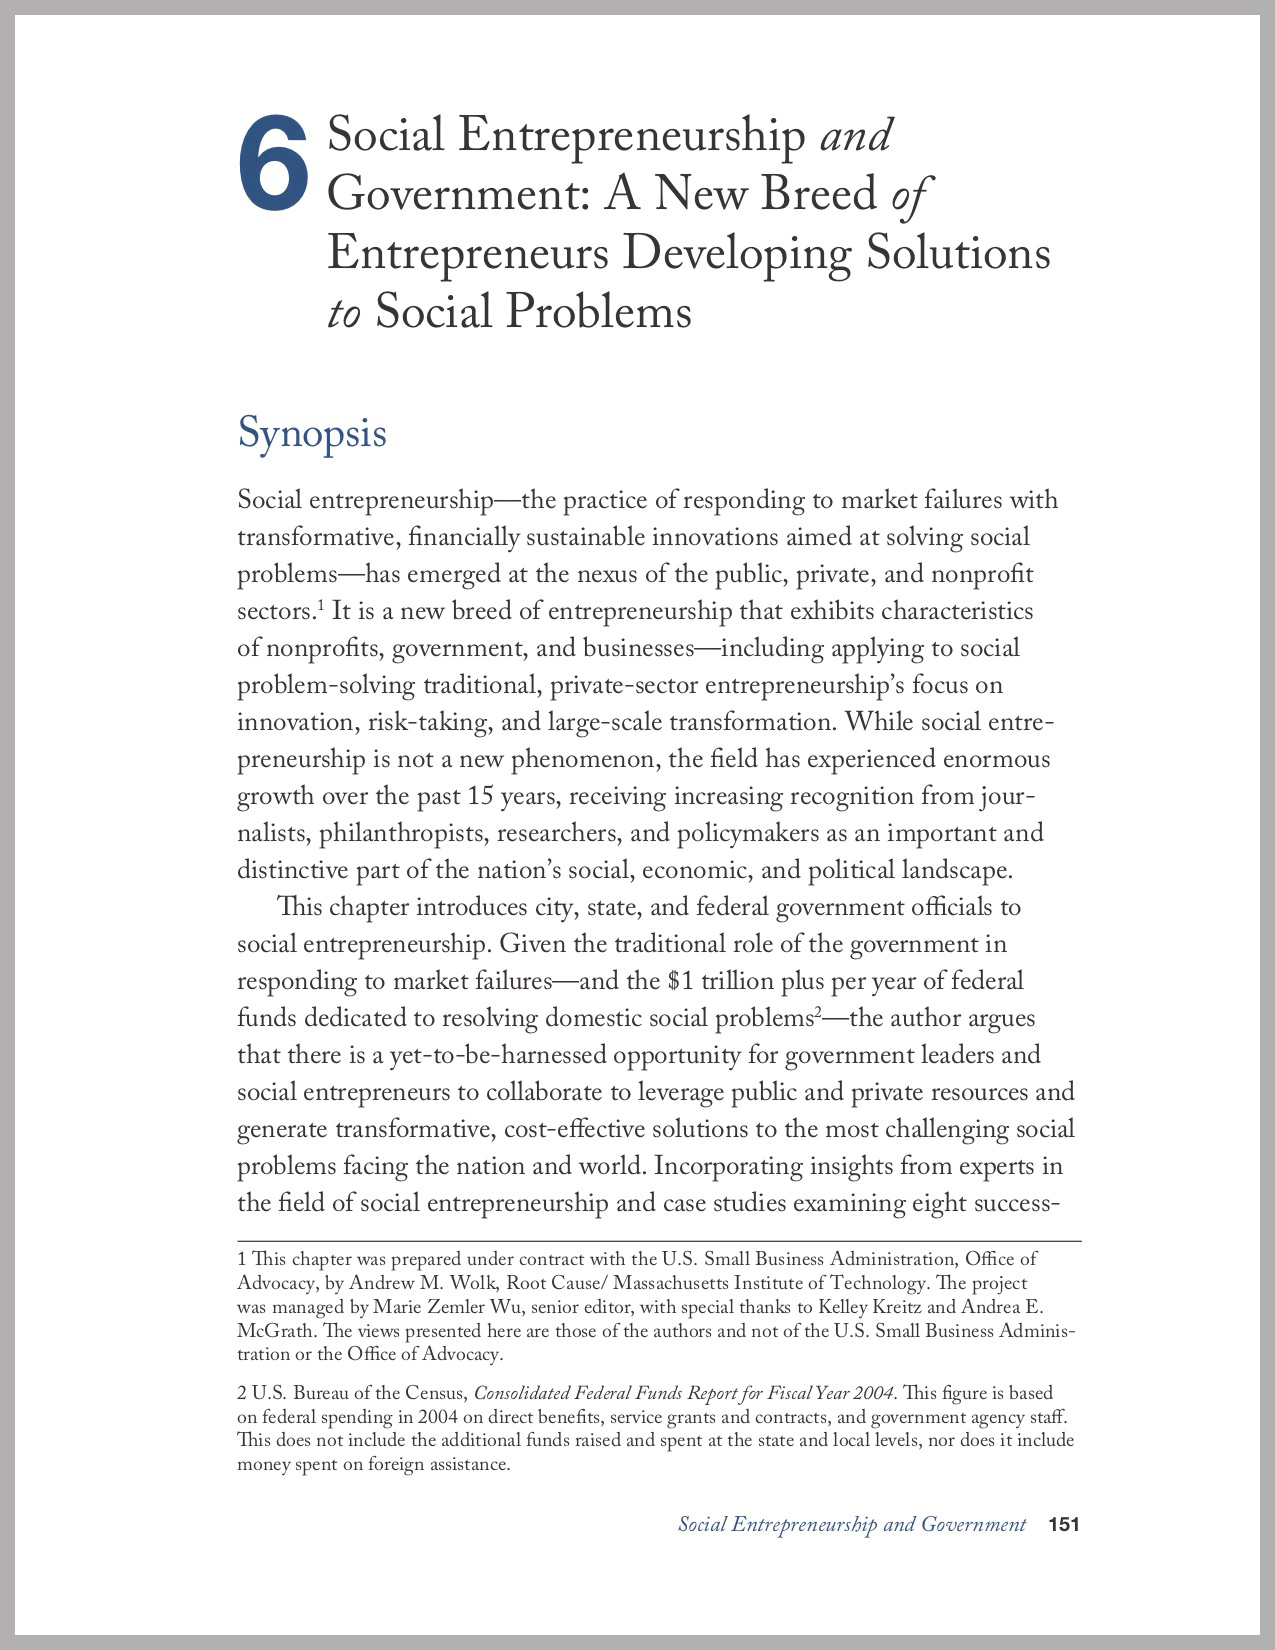 Social Entrepreneurship and Government: A New Breed of Entrepreneurs Developing Solutions to Social Problems